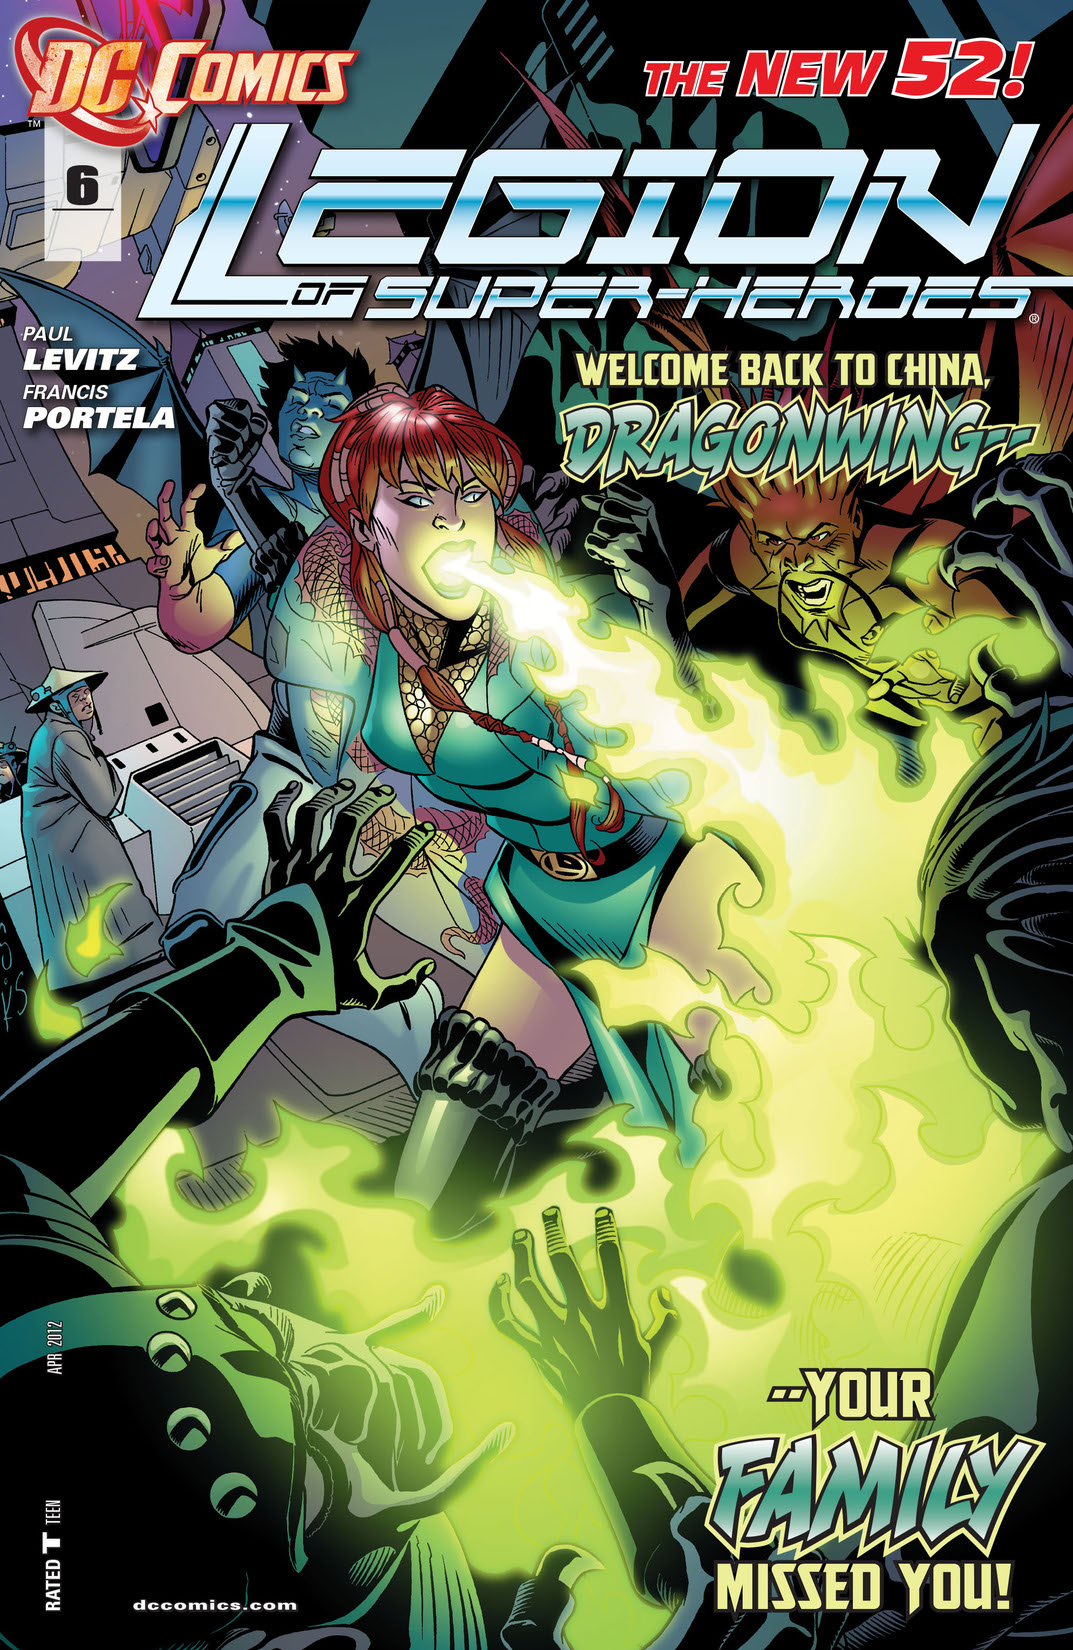 Legion of Super-Heroes (2011-) #6 preview images